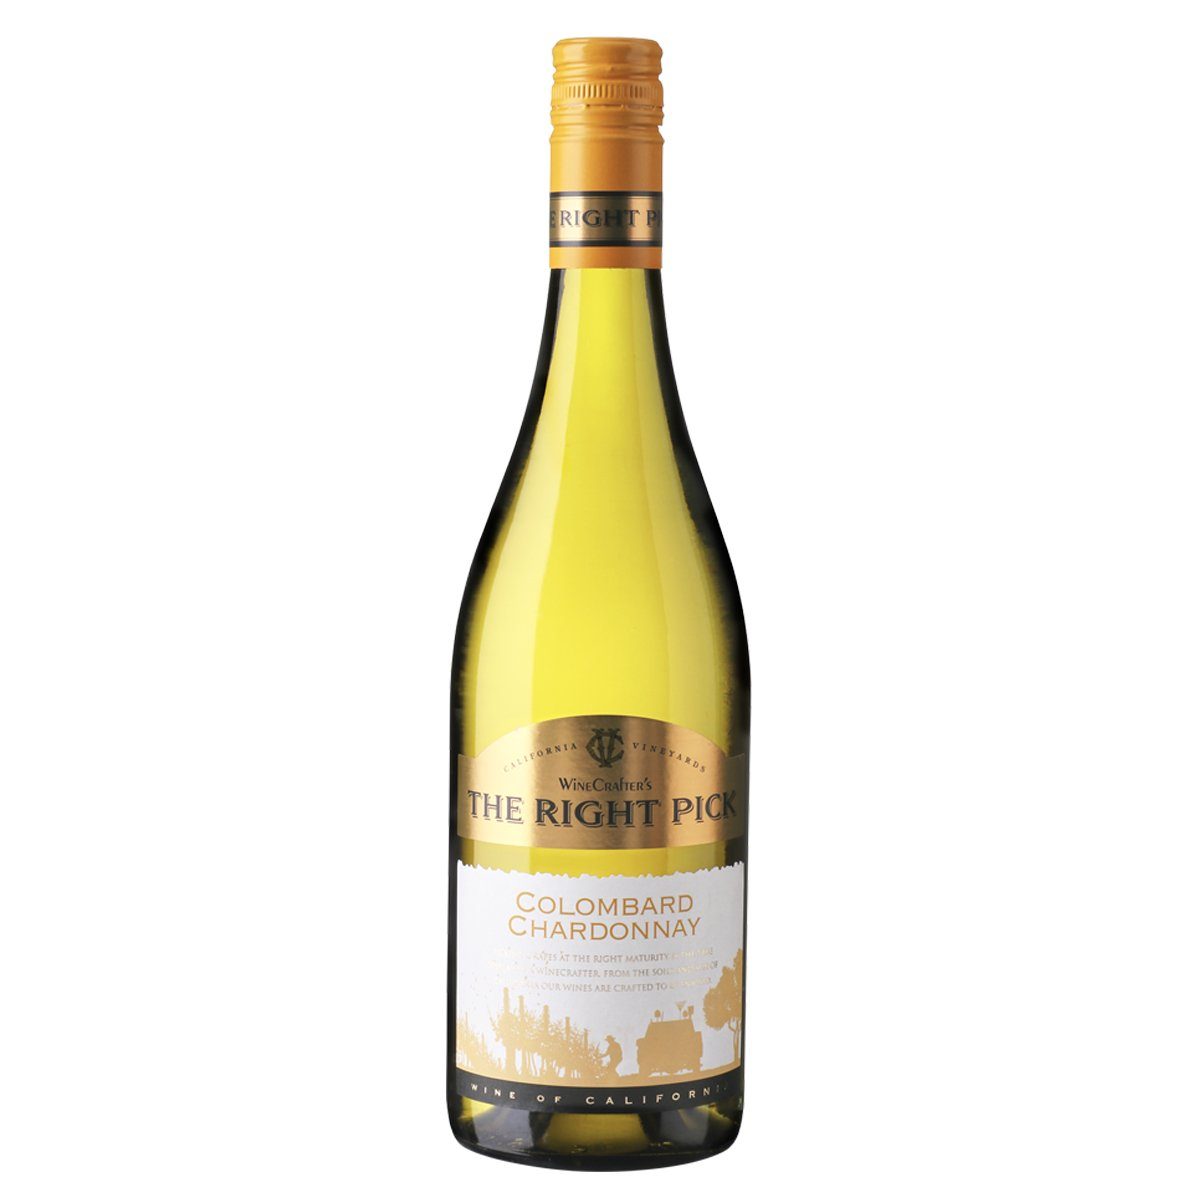 The Right Pick Colombard Chardonnay 2018 - Bloom Concept